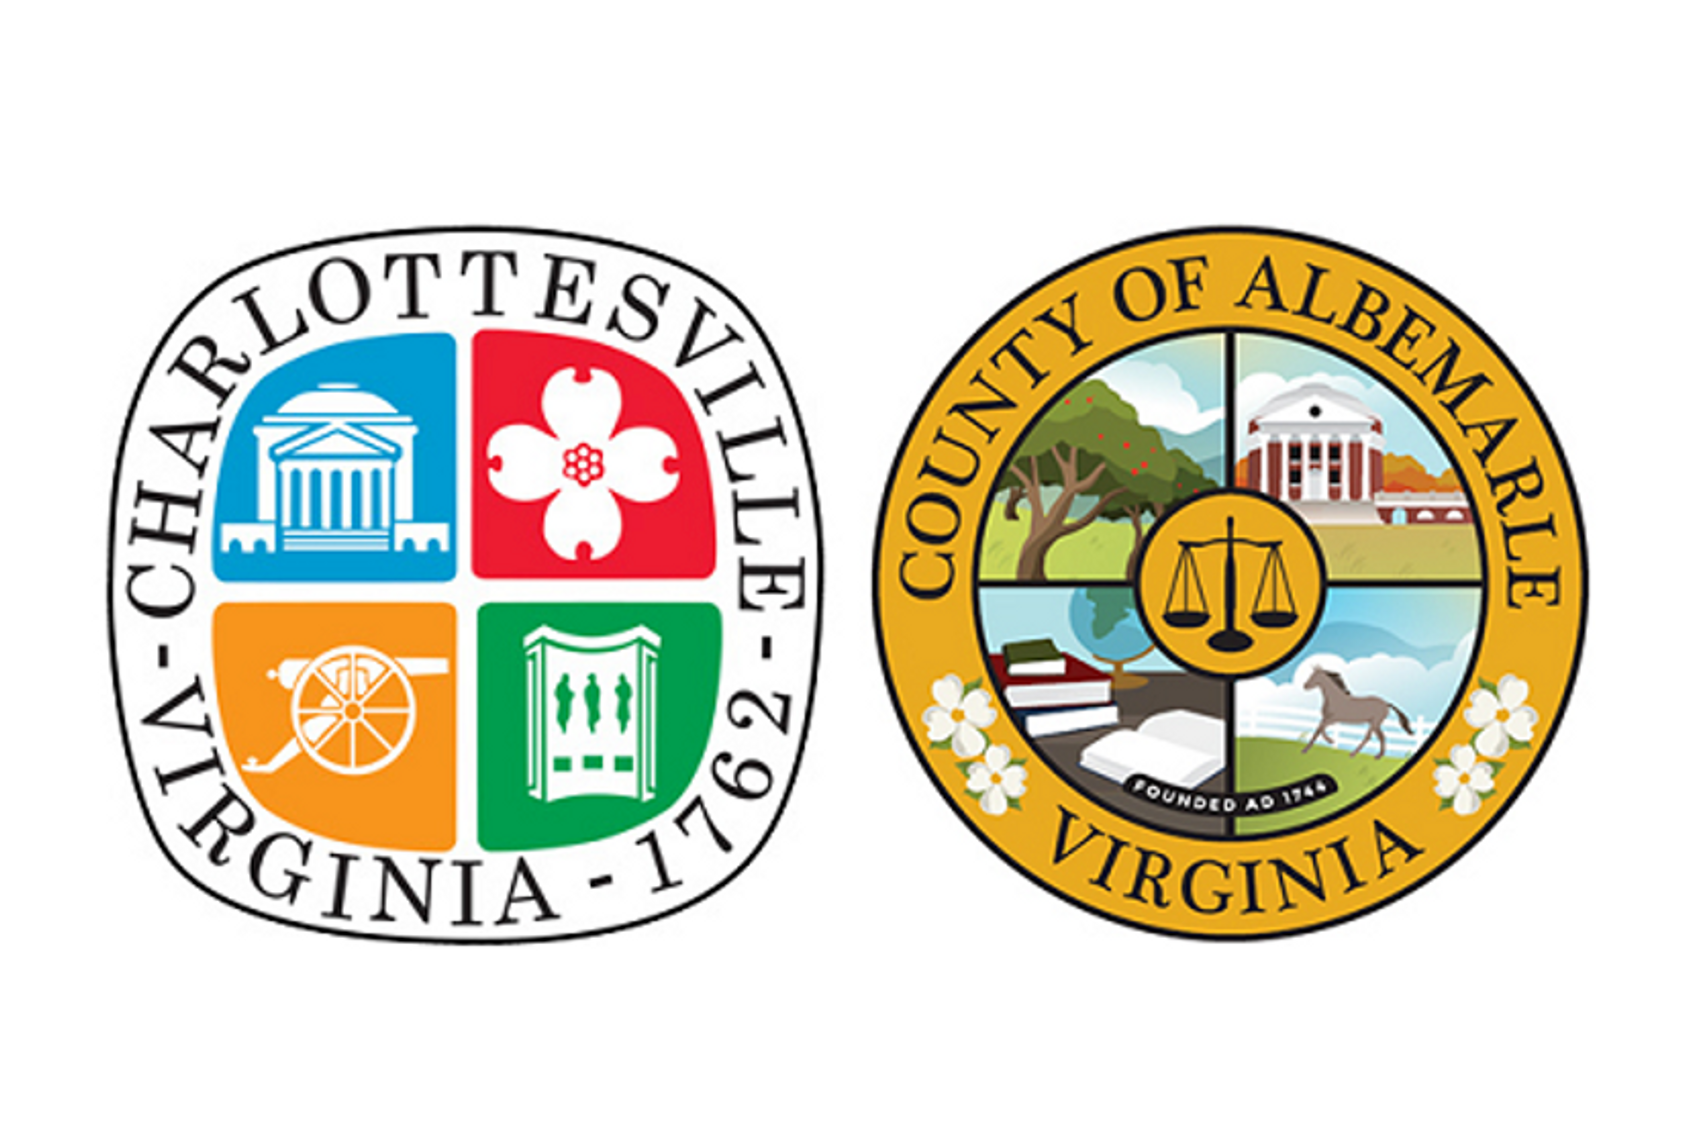 Image for 4 Tax Delinquent Properties Located in Albemarle County & The City of Charlottesville, VA